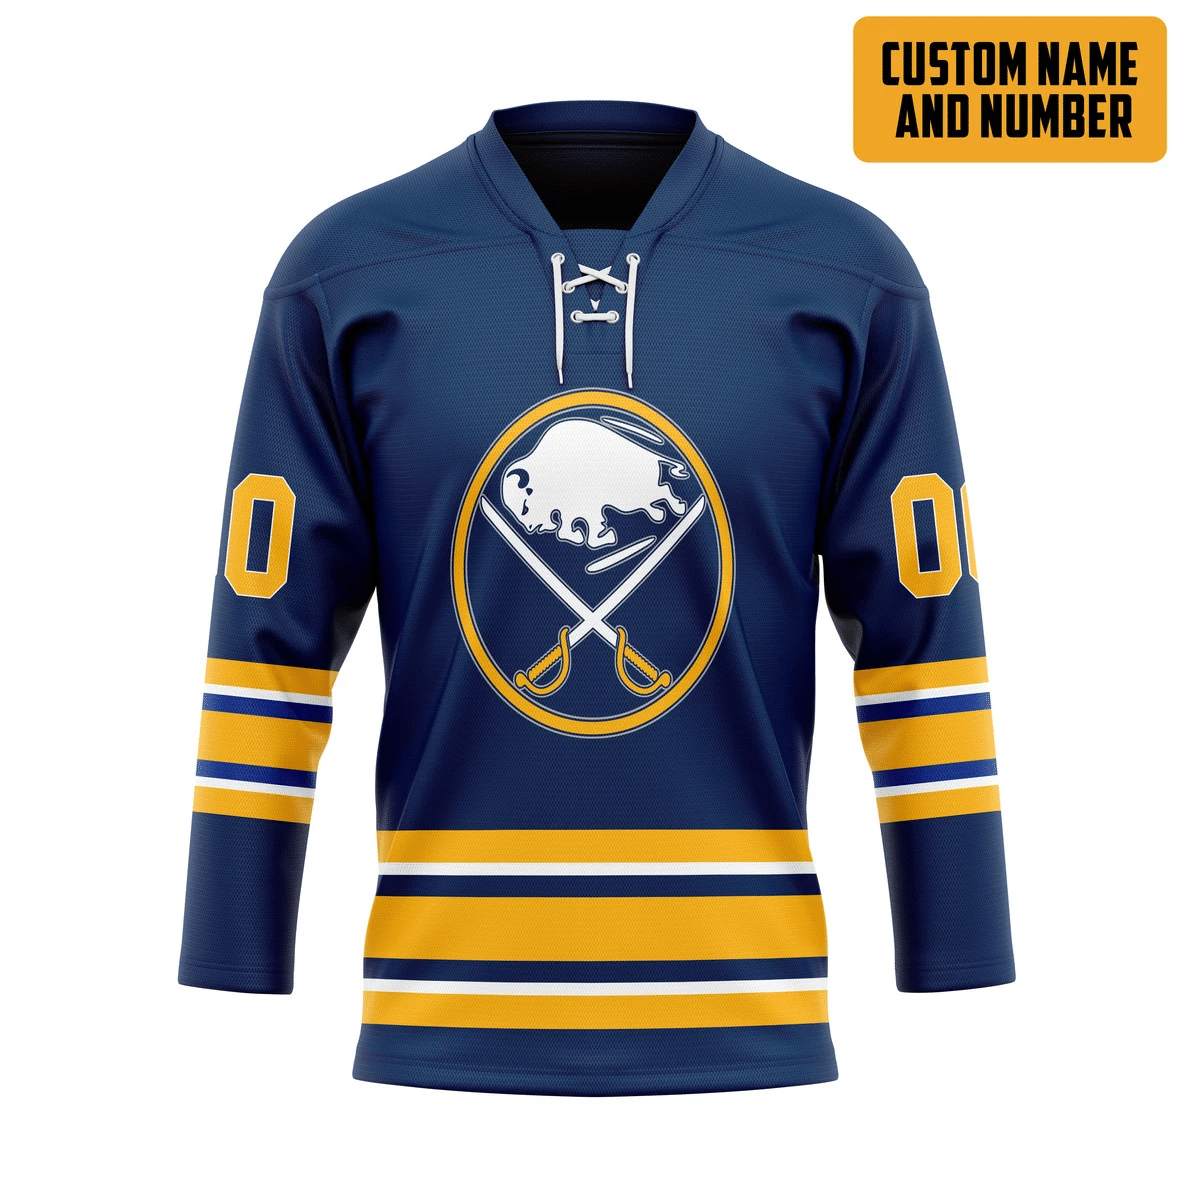 Choosing a hockey jersey is not as difficult as you think. 87